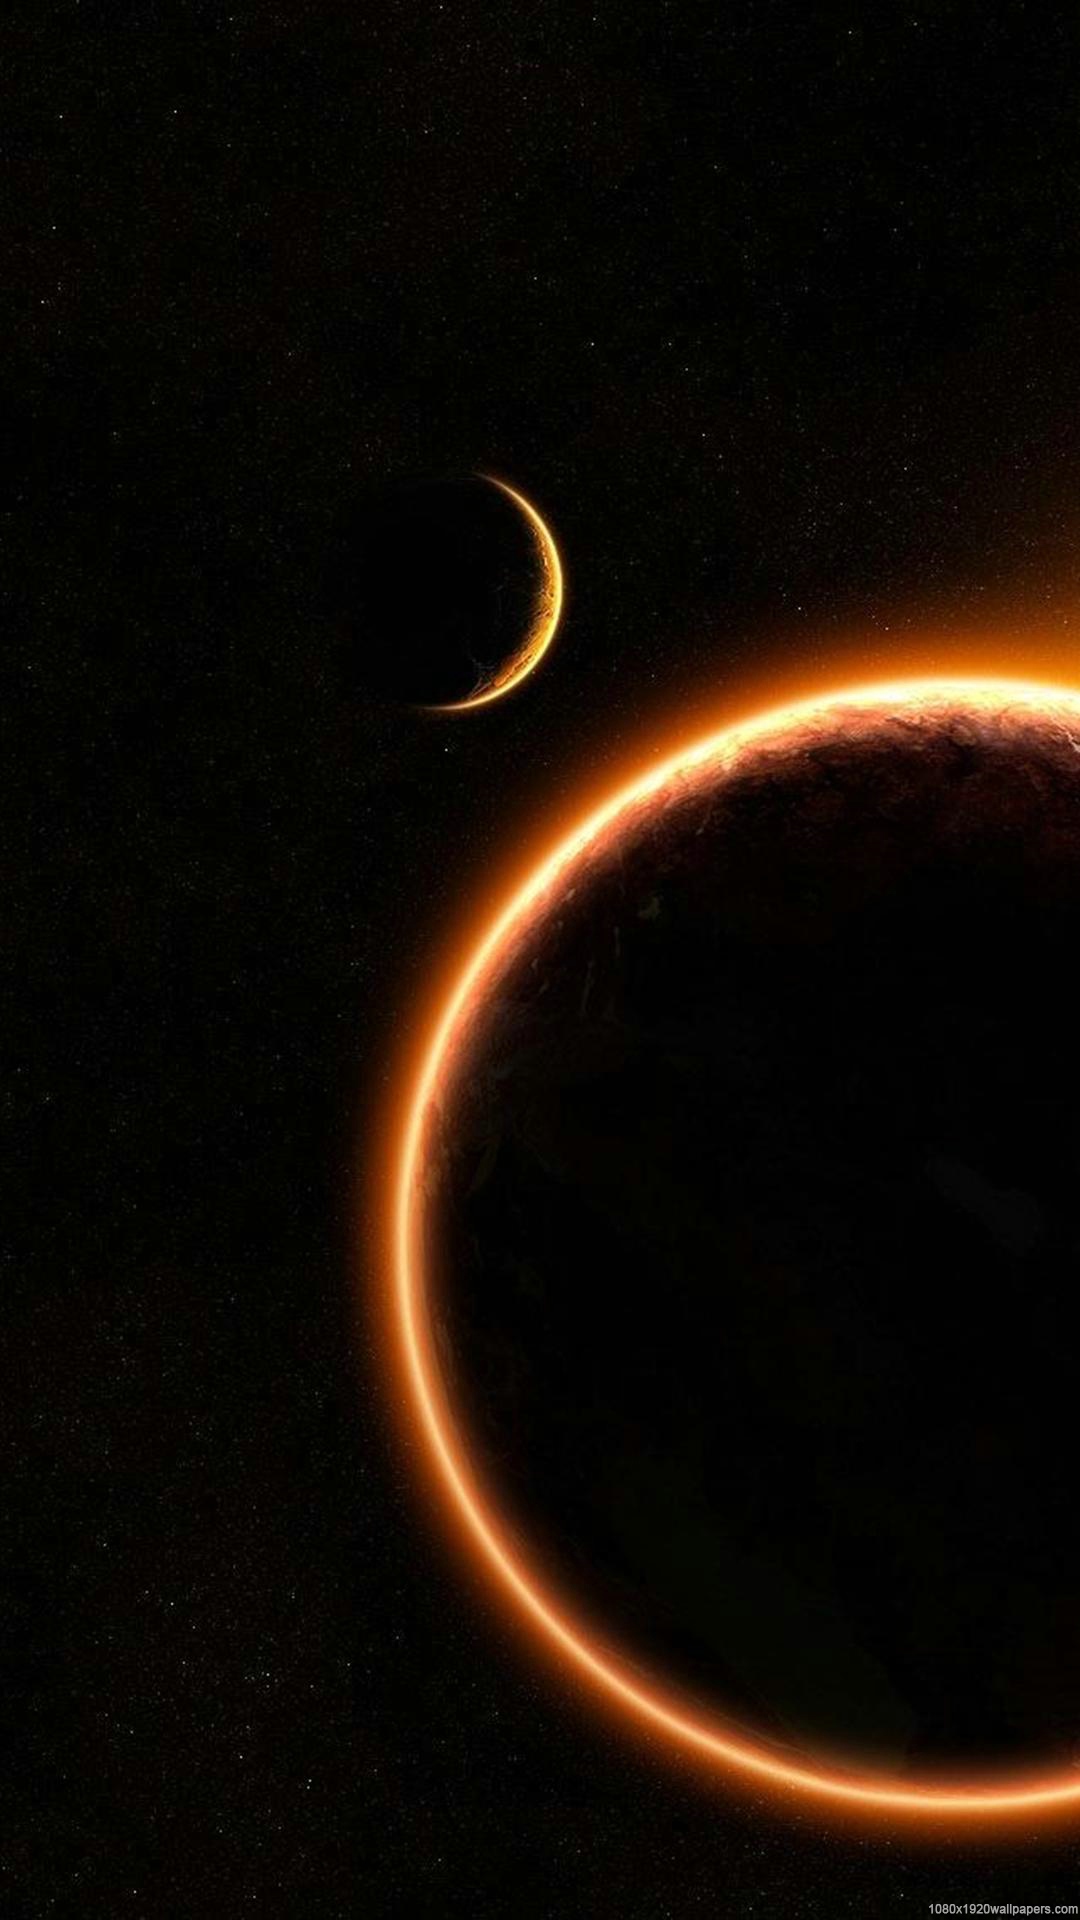 eclipse iphone wallpaper,crescent,atmosphere,astronomical object,outer space,eclipse